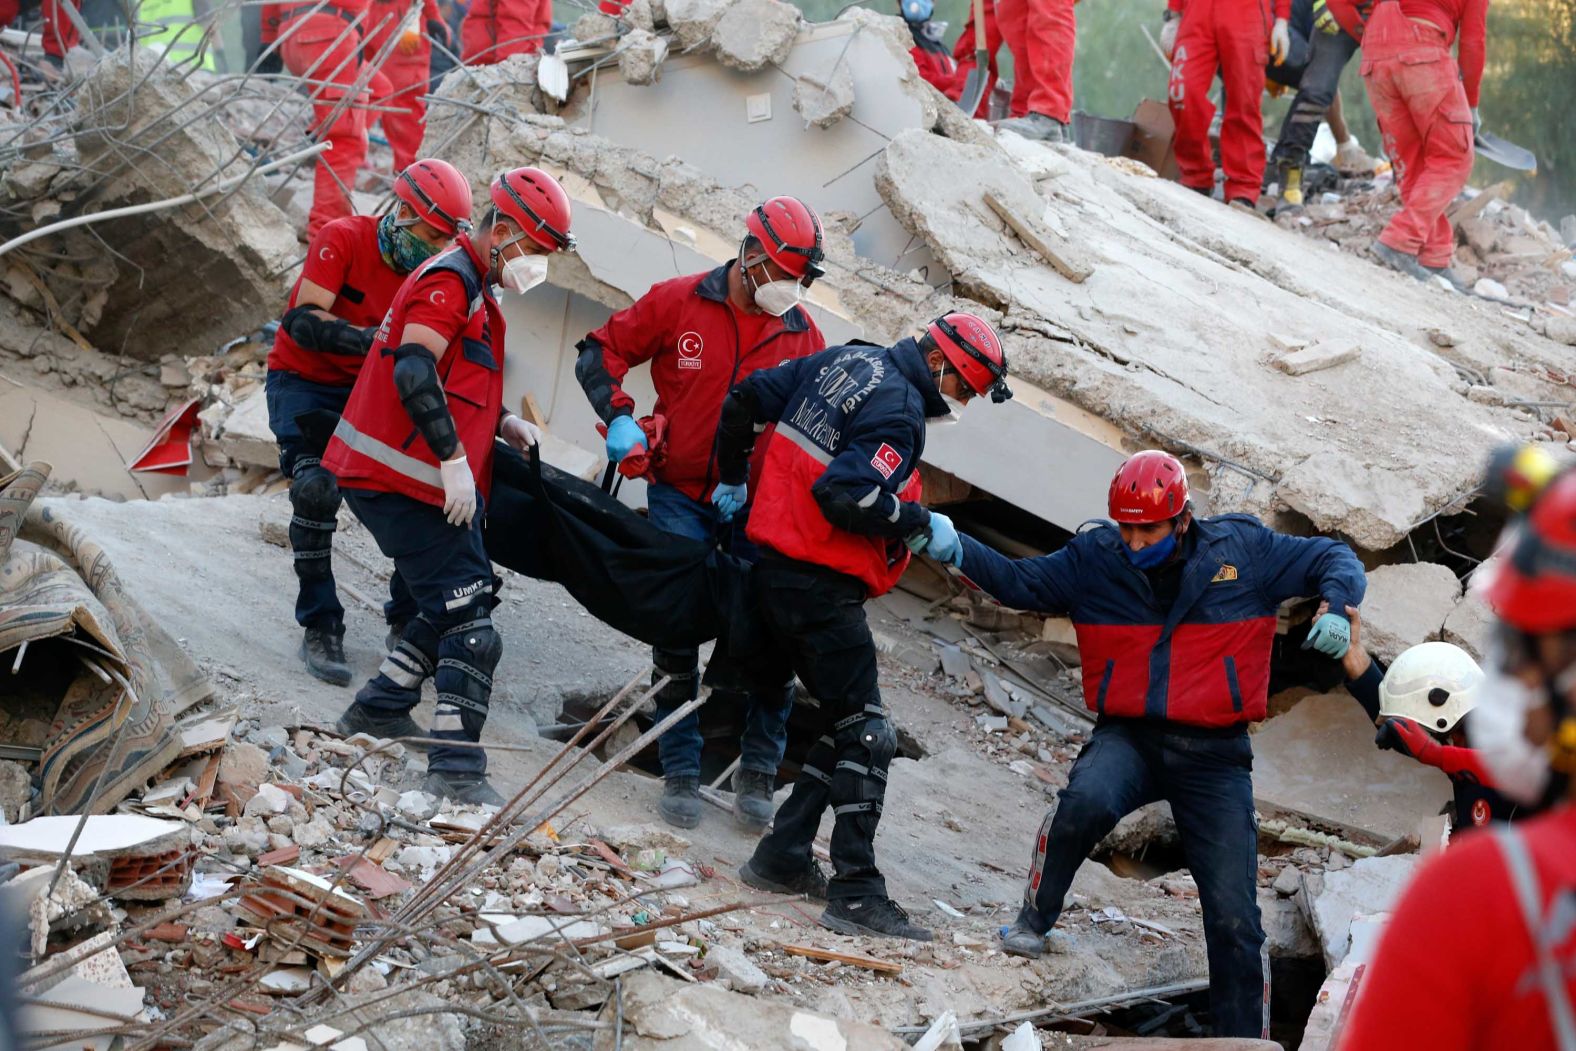 Members of a rescue crew carry a victim's body in Izmir.